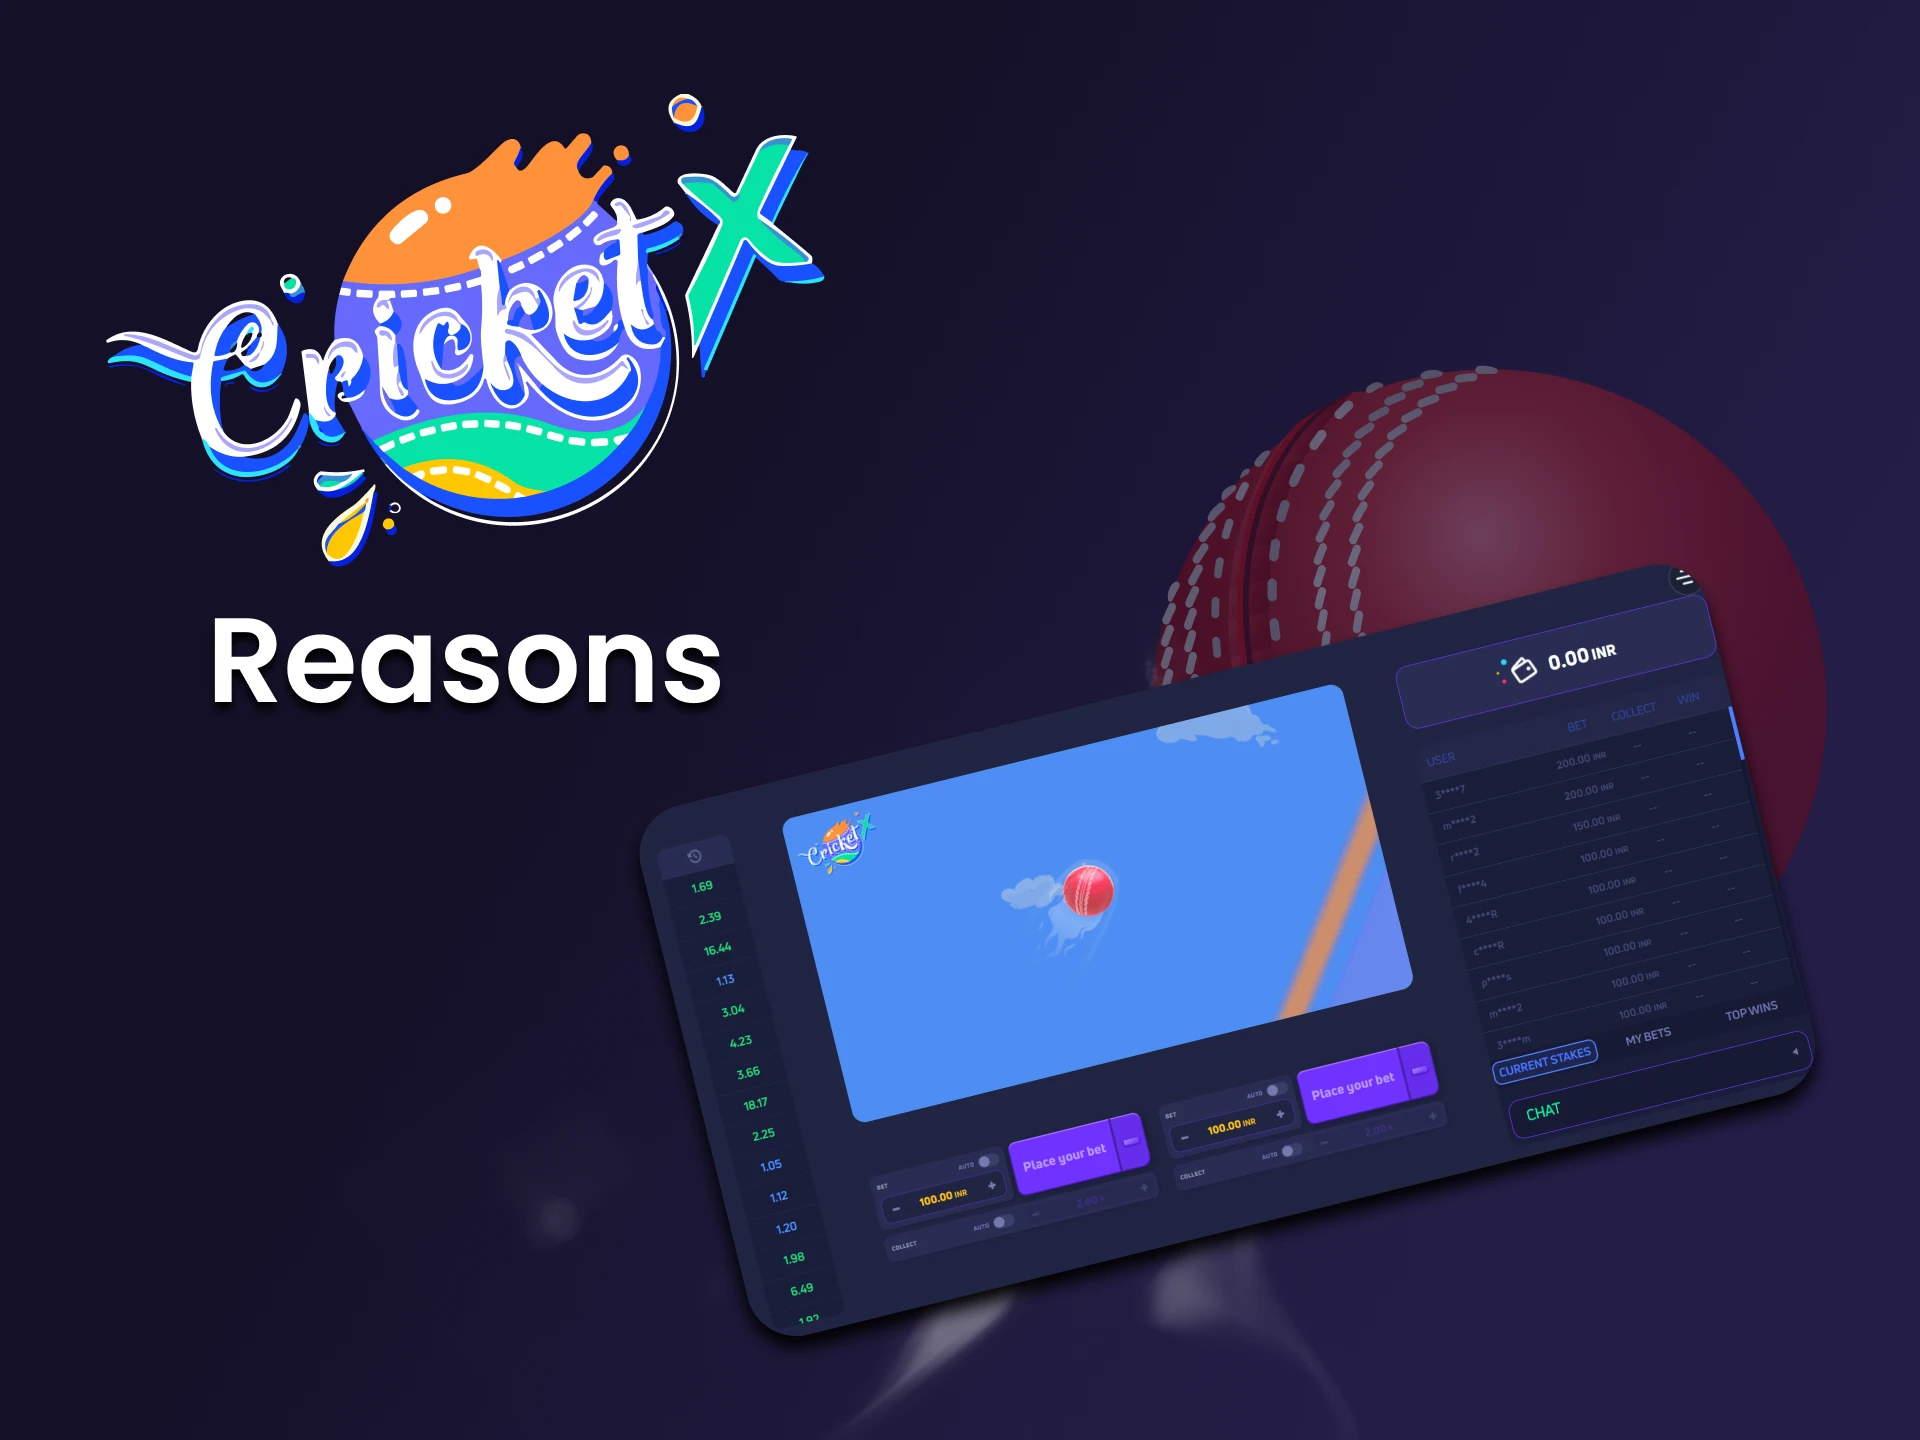 Find out the reasons for the popularity of Cricket X.